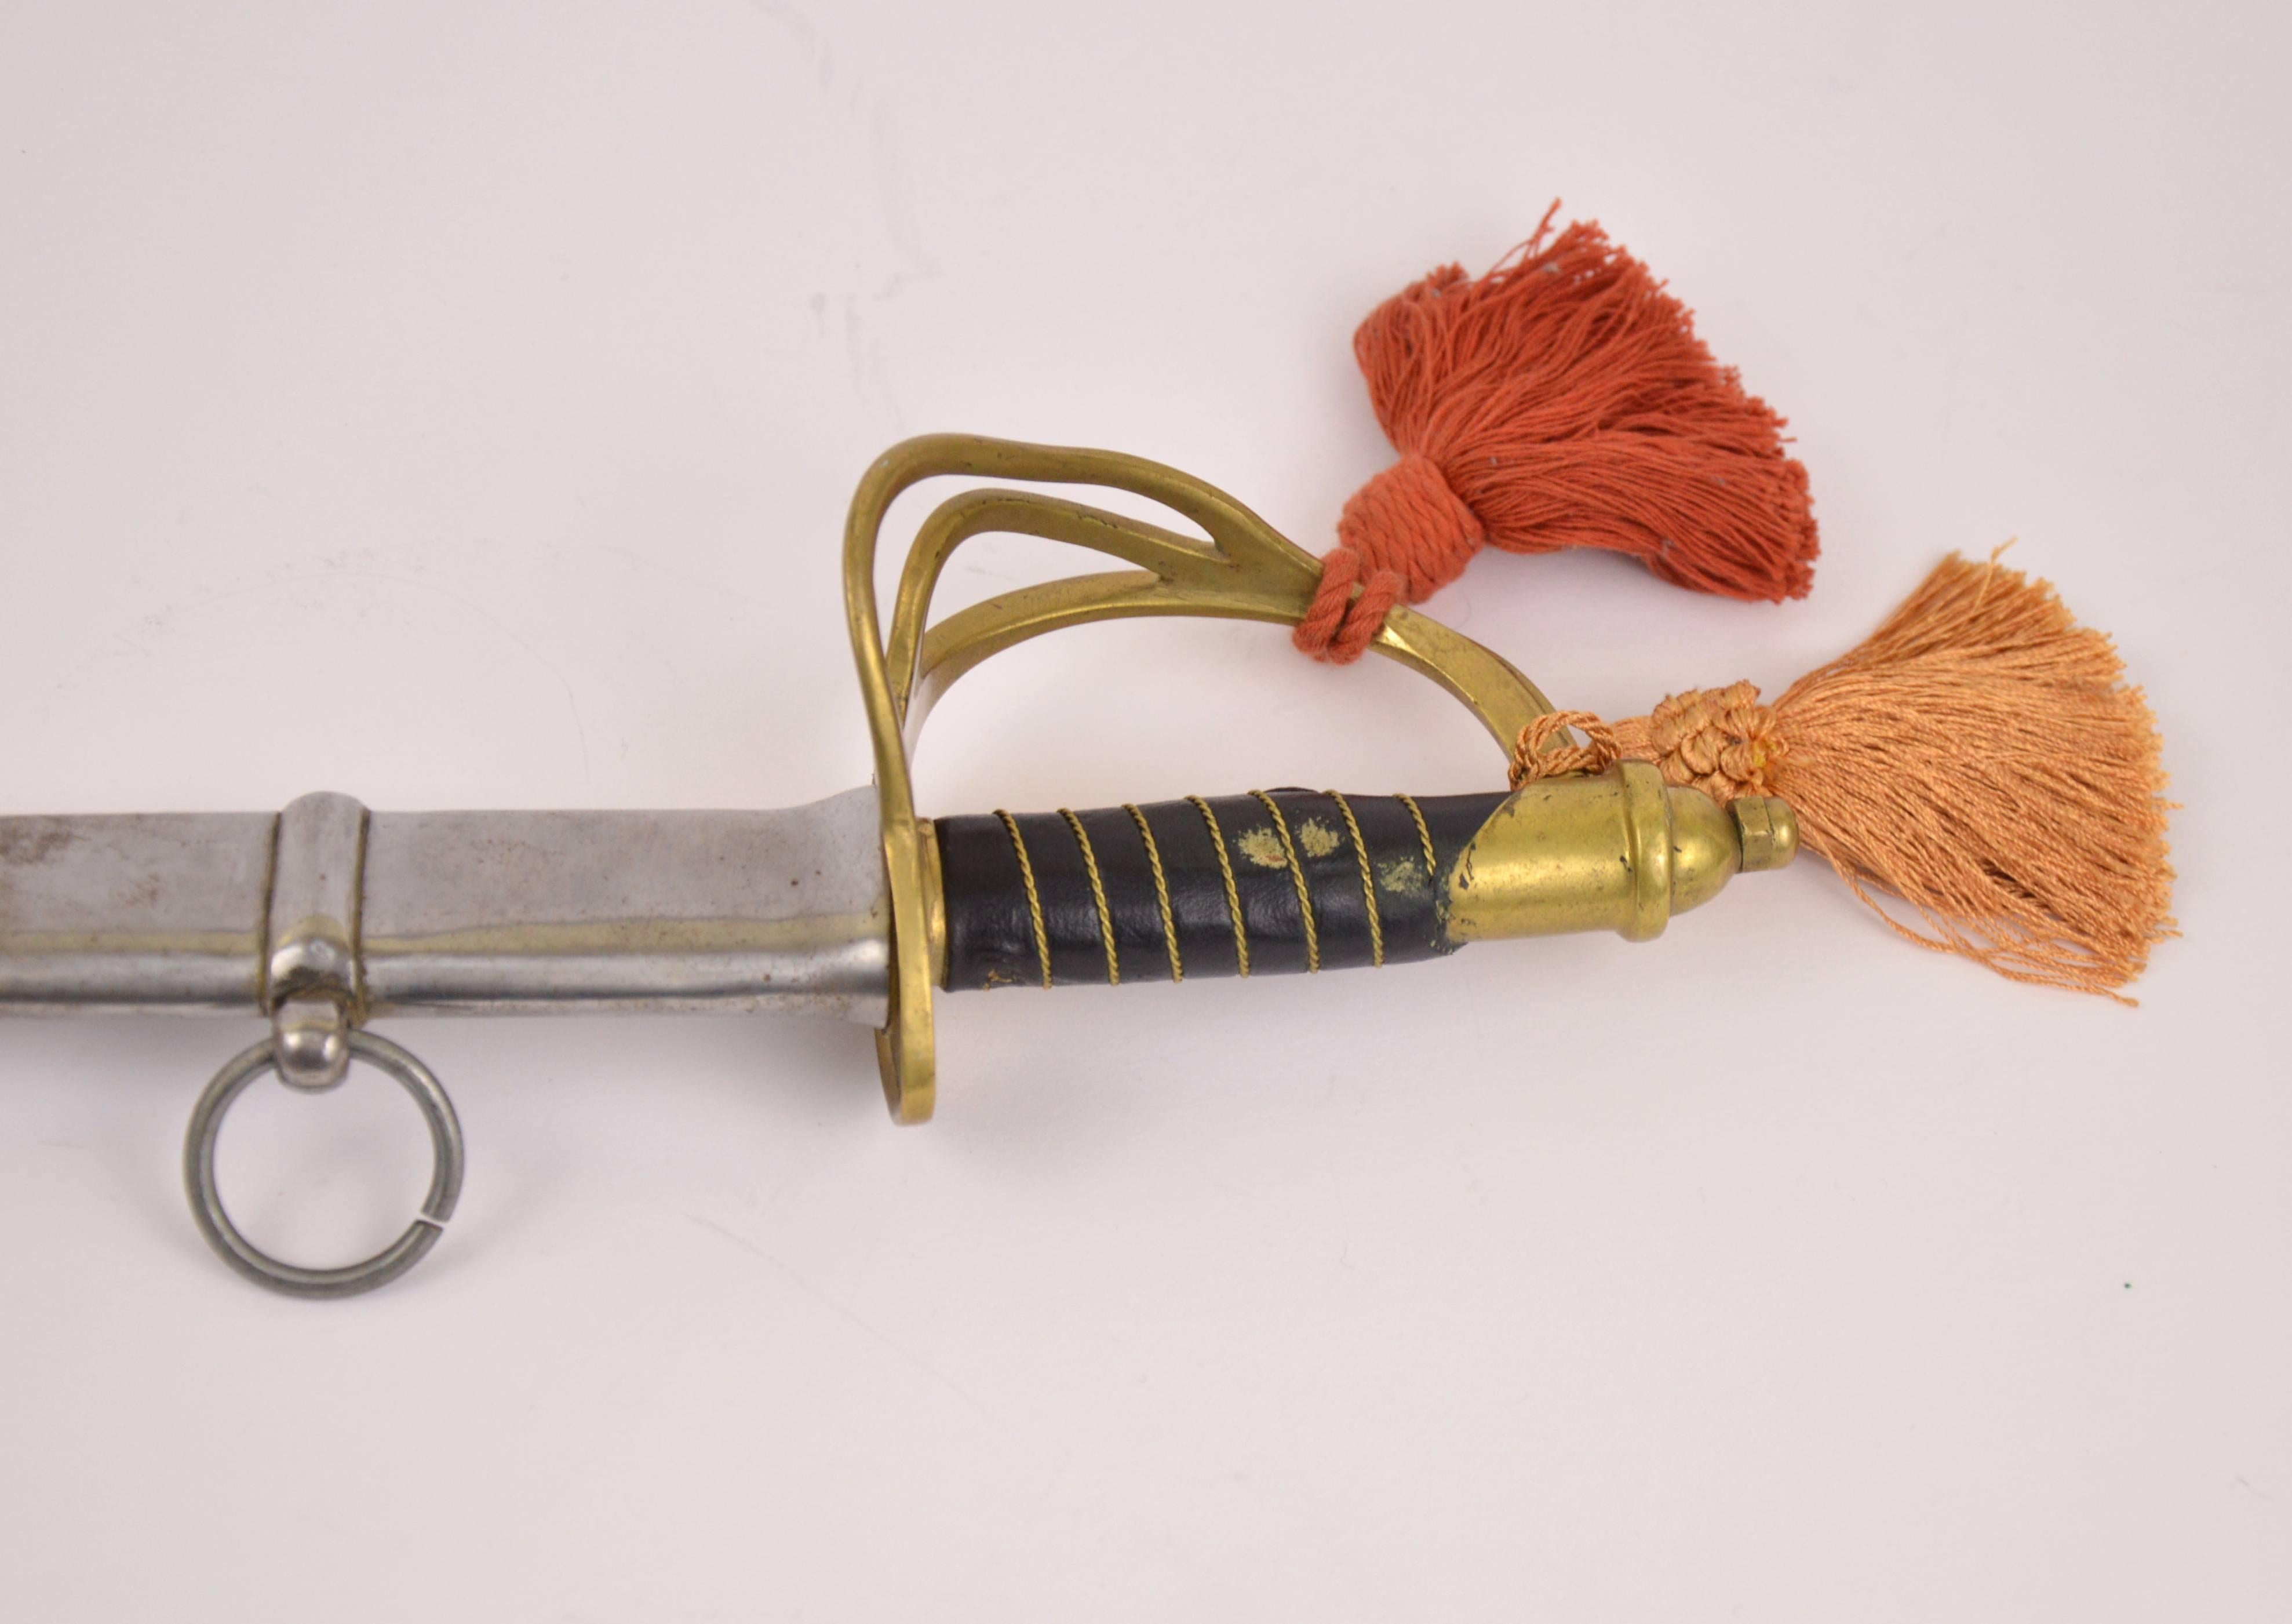 Sabre sword child infantry 19-th century.
Total length: 74 cm.
Condition: please check the photos.